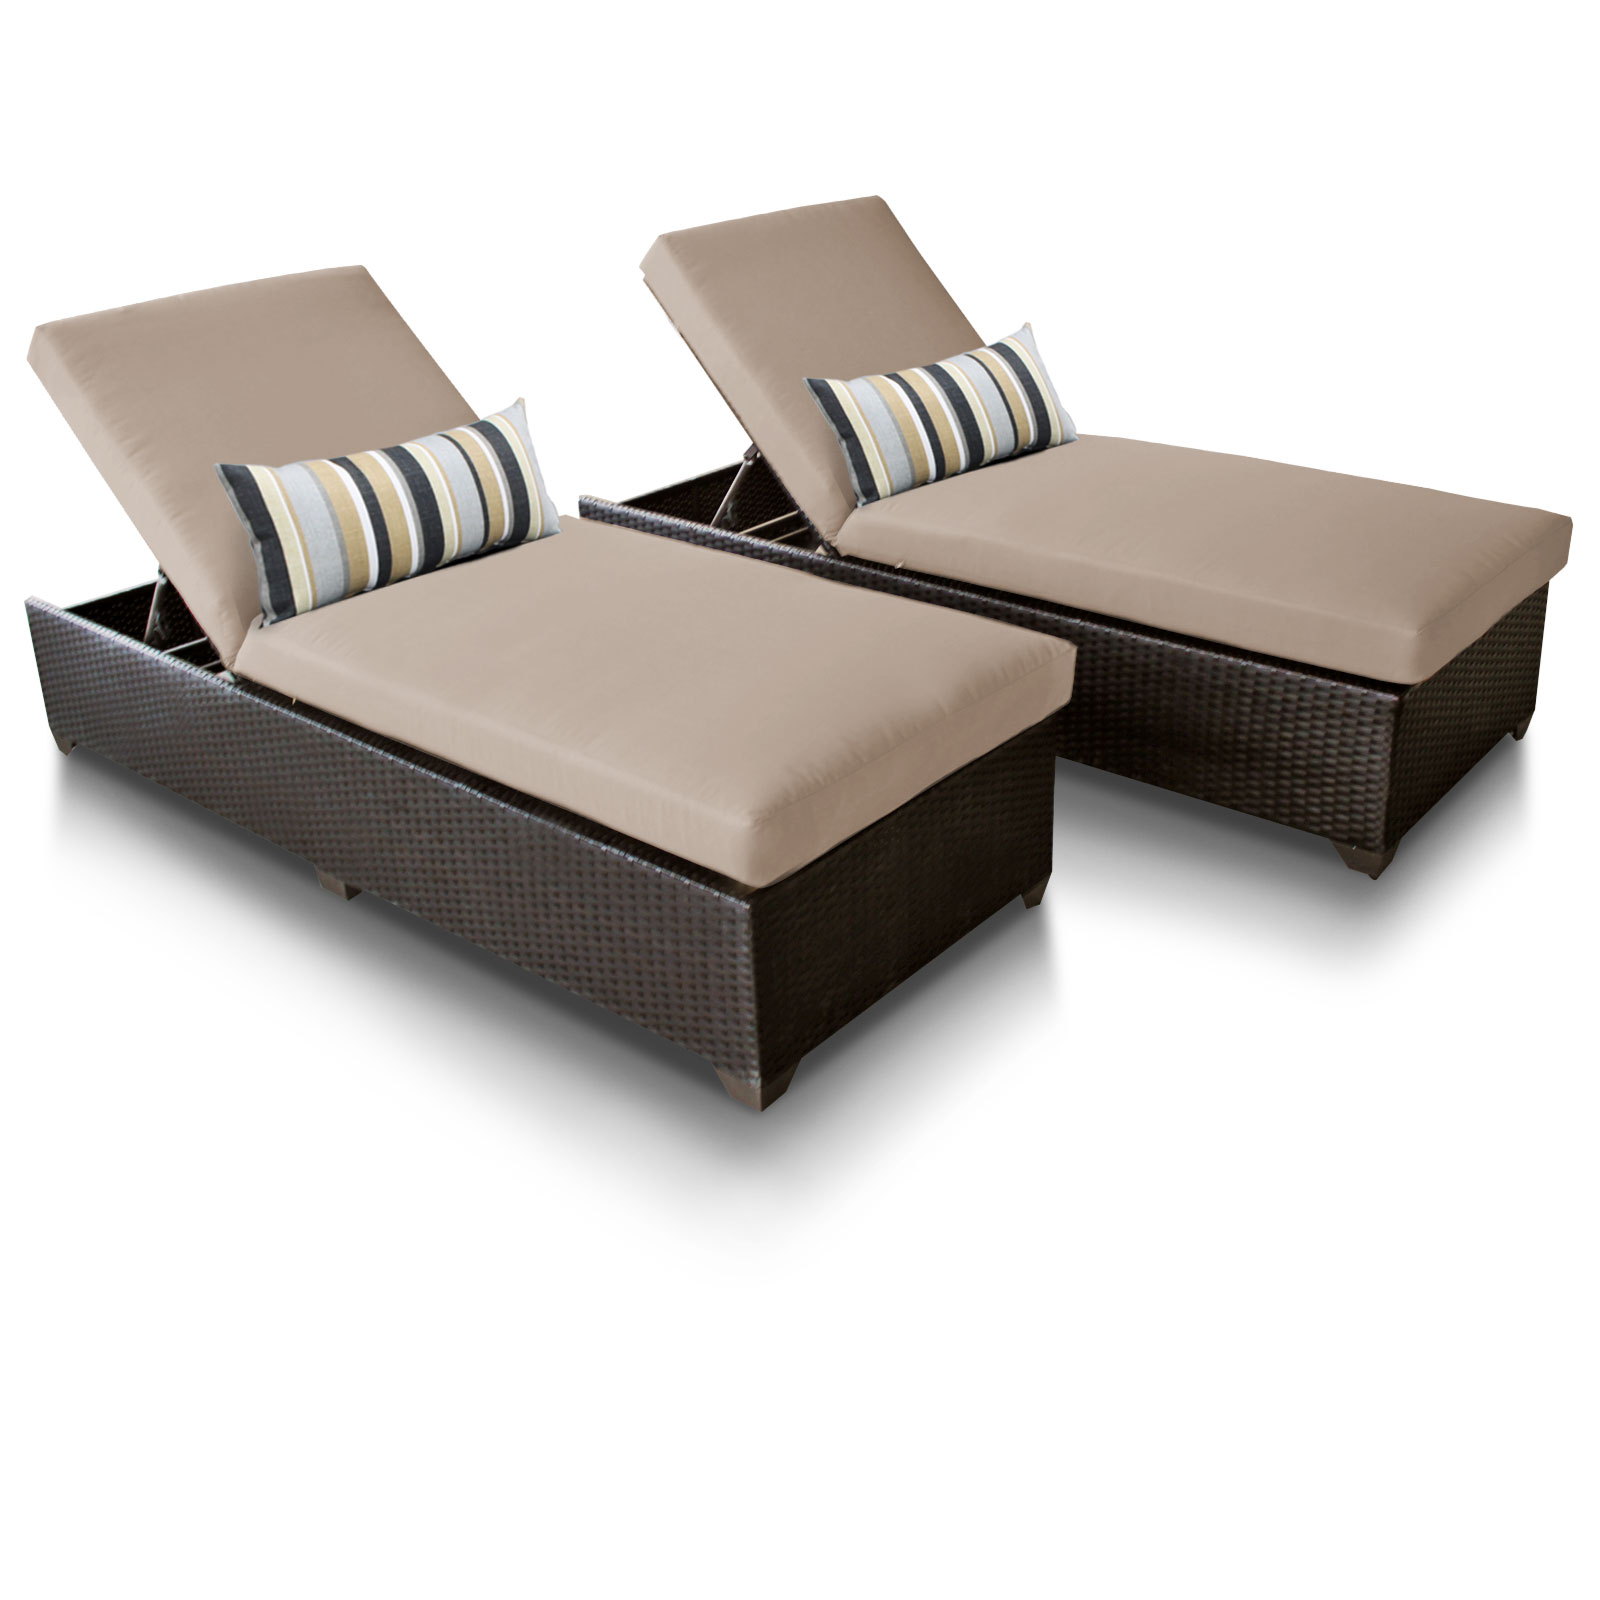 Classic Chaise Set of 2 Outdoor Wicker Patio Furniture